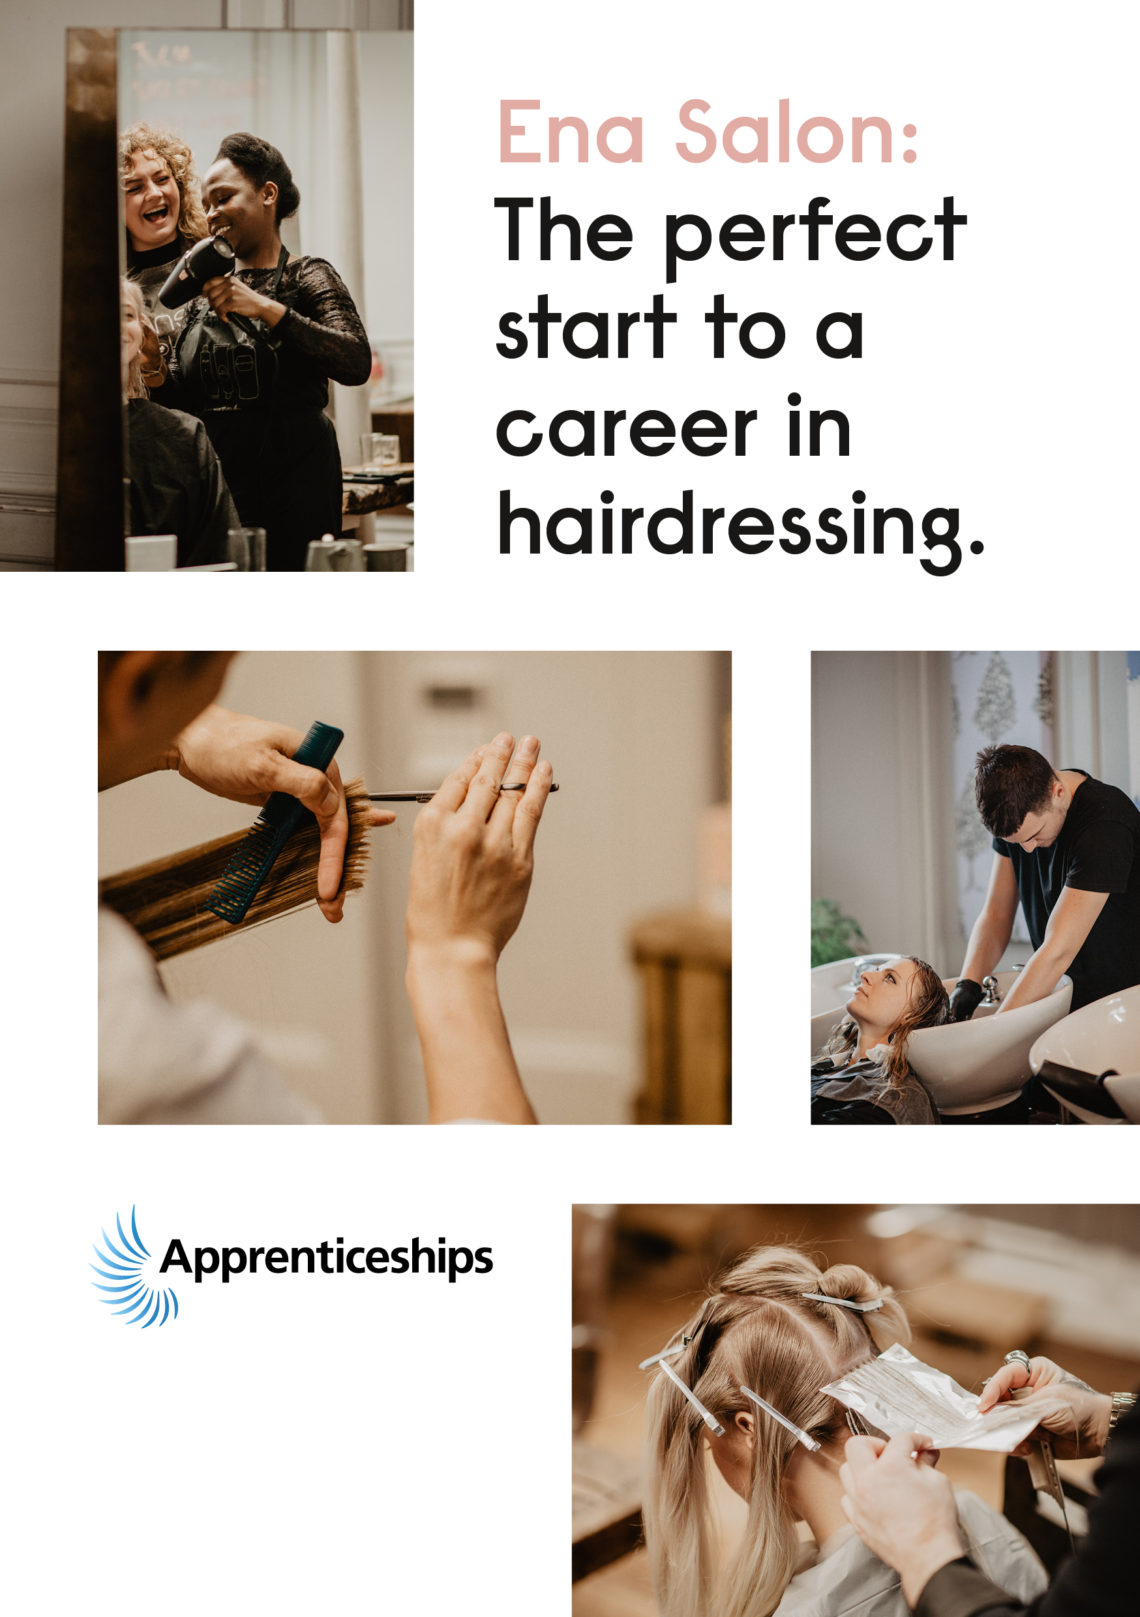 Become an Assistant at Ena Salon